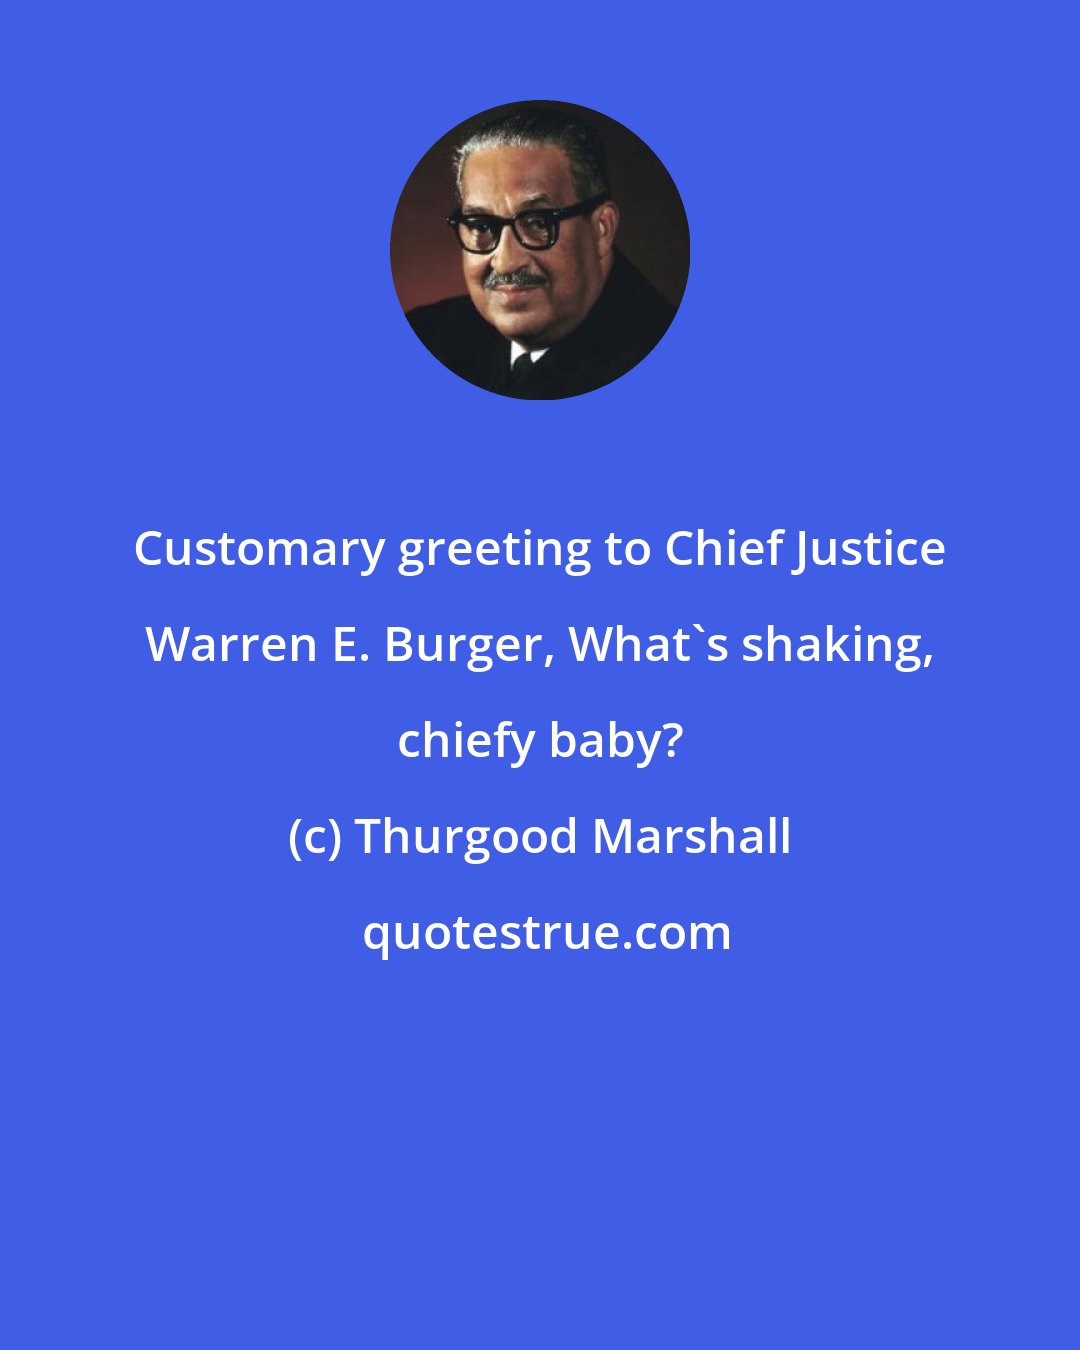 Thurgood Marshall: Customary greeting to Chief Justice Warren E. Burger, What's shaking, chiefy baby?